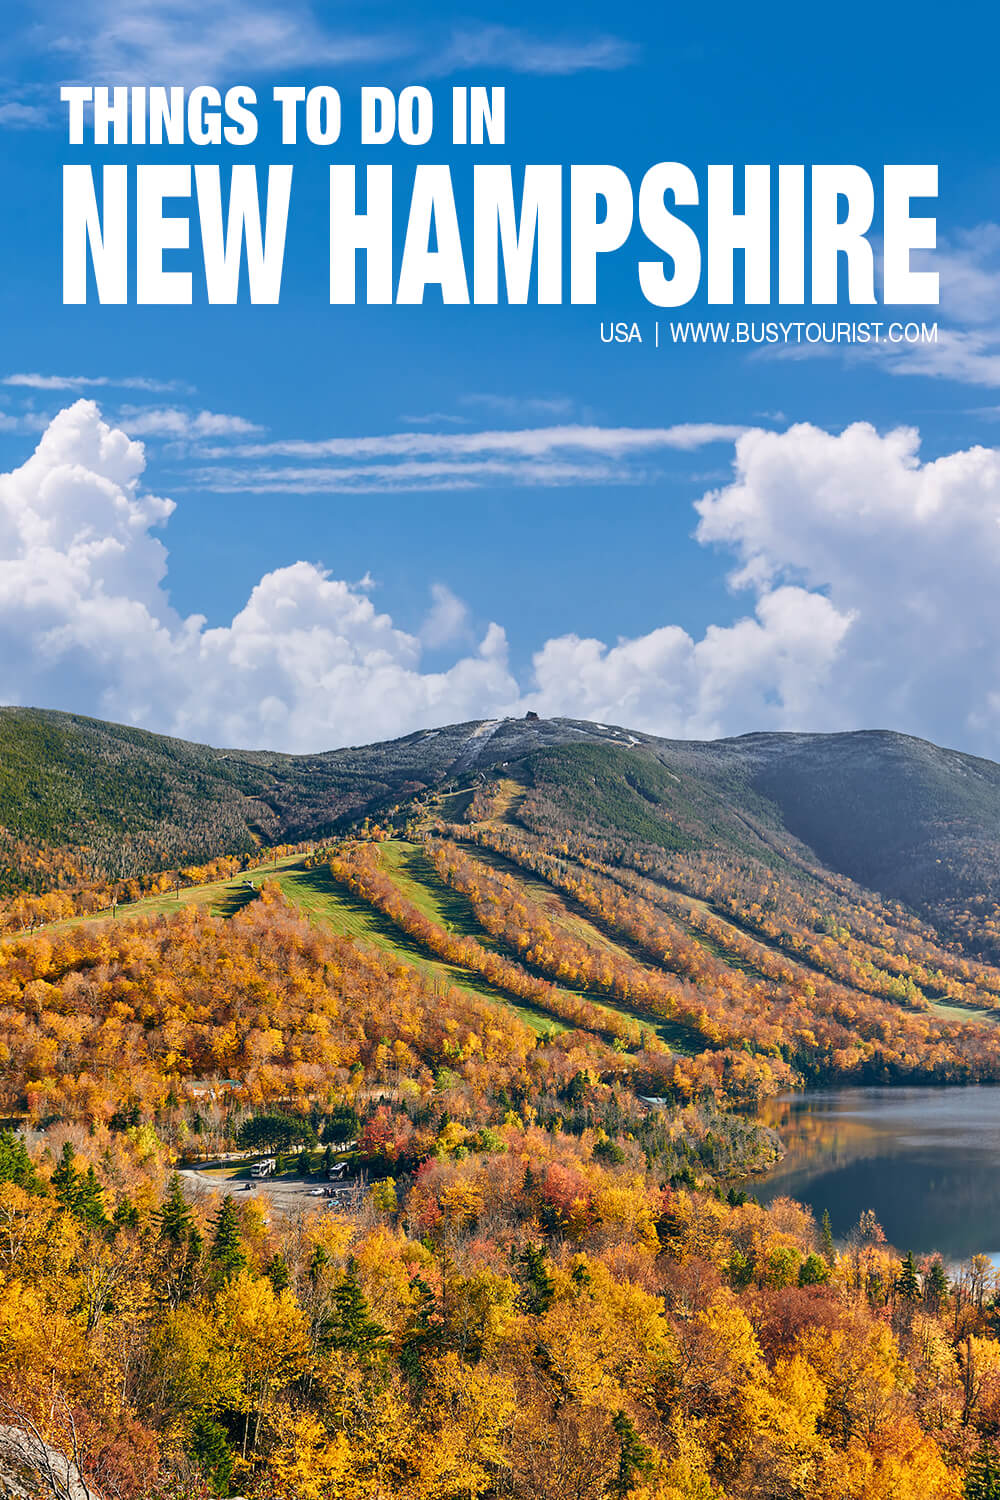 52 Things To Do & Places To Visit In New Hampshire Attractions